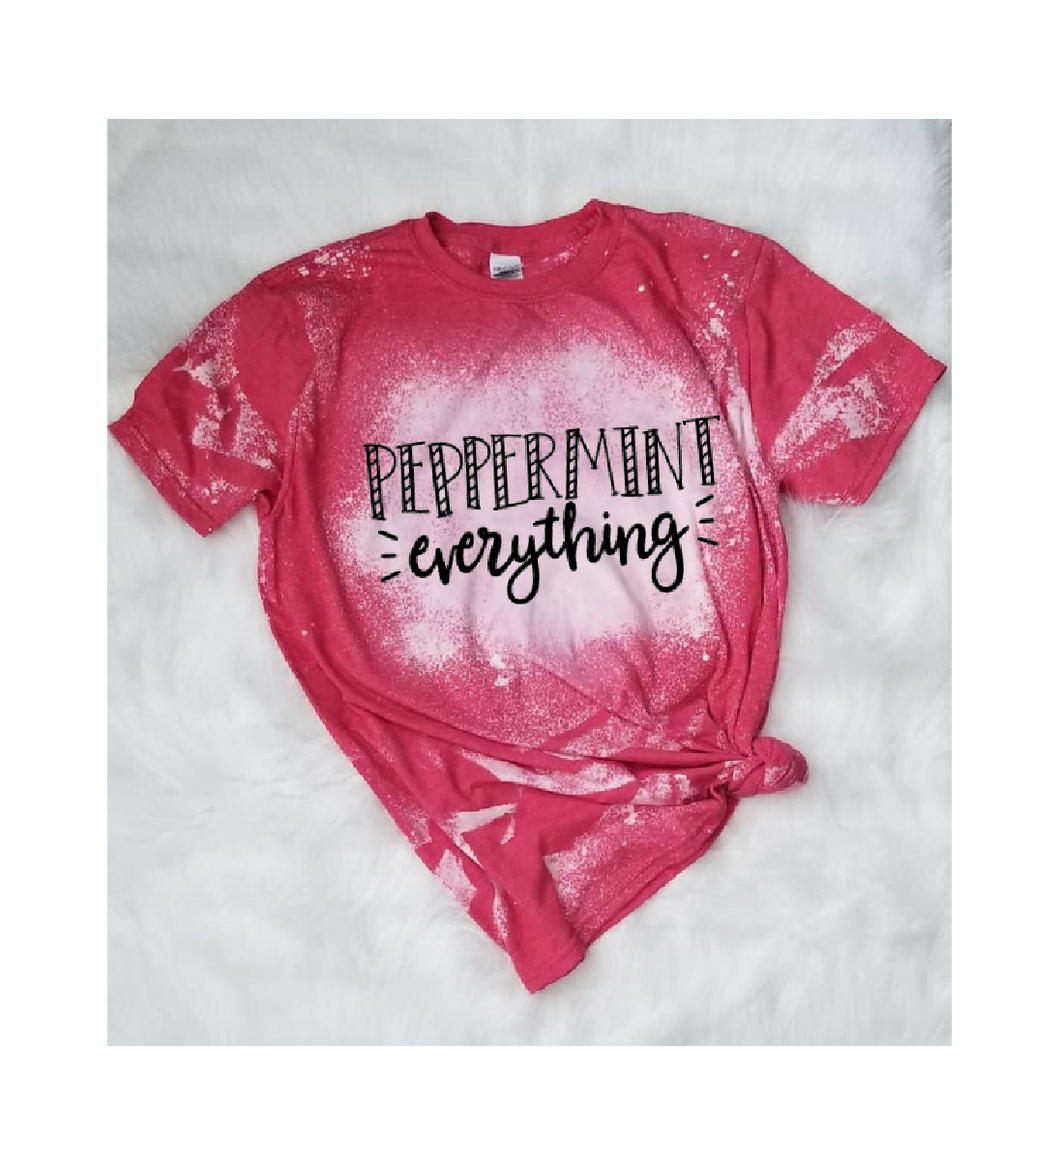 Peppermint everything bleached funny graphic tee long sleeve crew or hoodie - Mavictoria Designs Hot Press Express